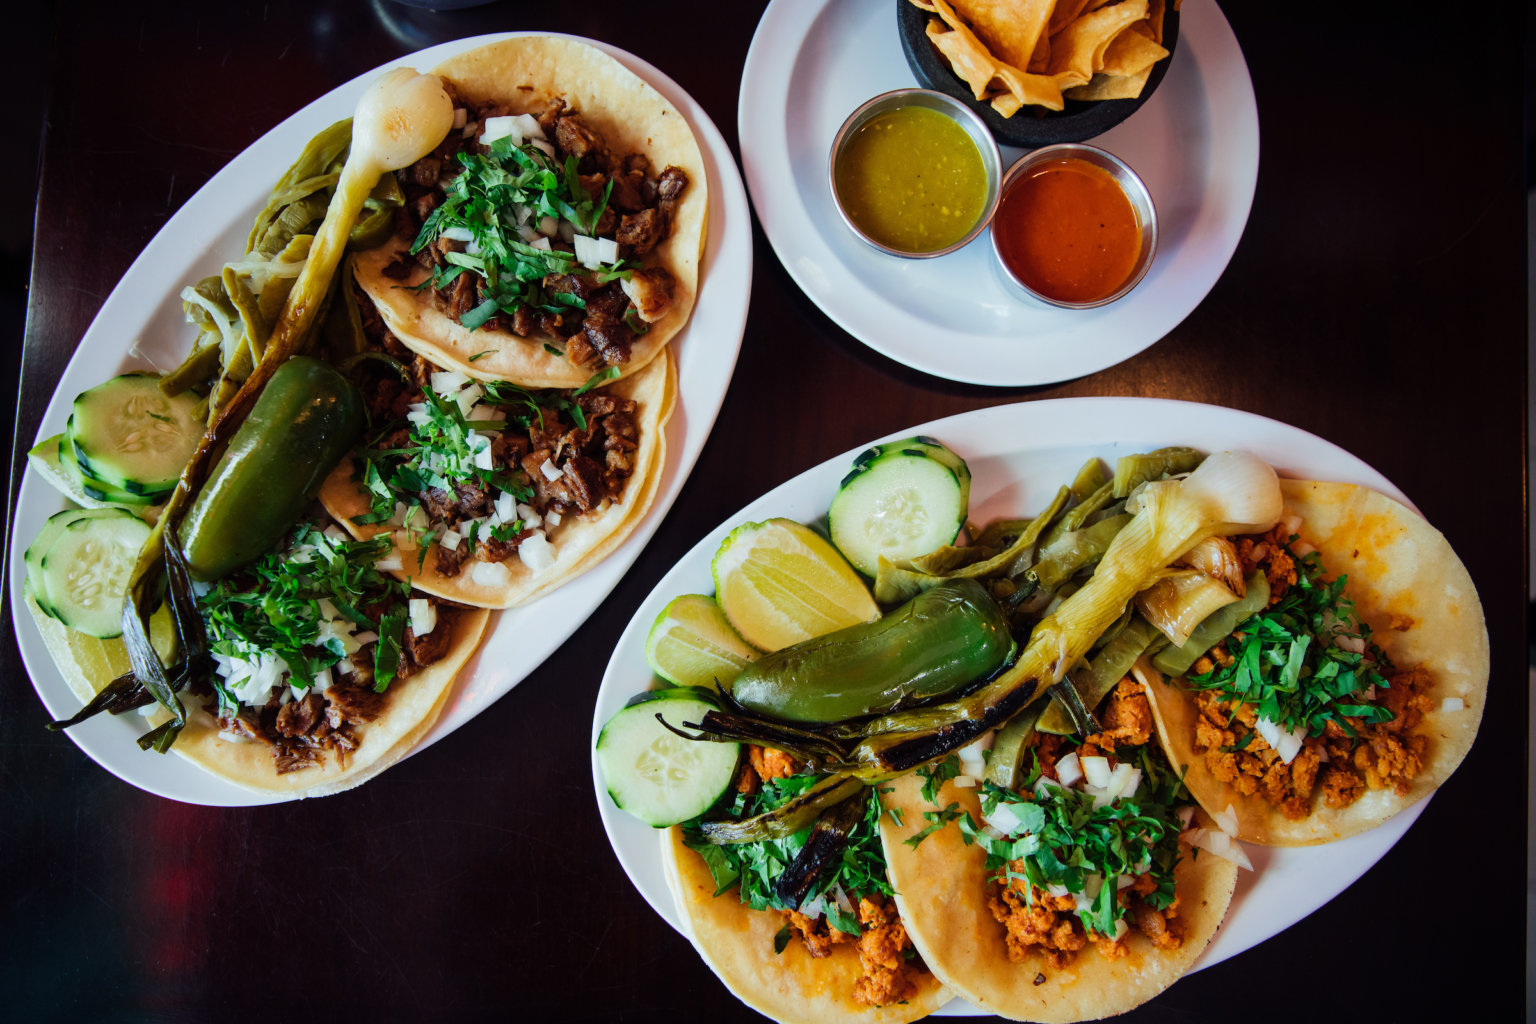 Dine Latino Restaurant Week shines a light on diverse businesses